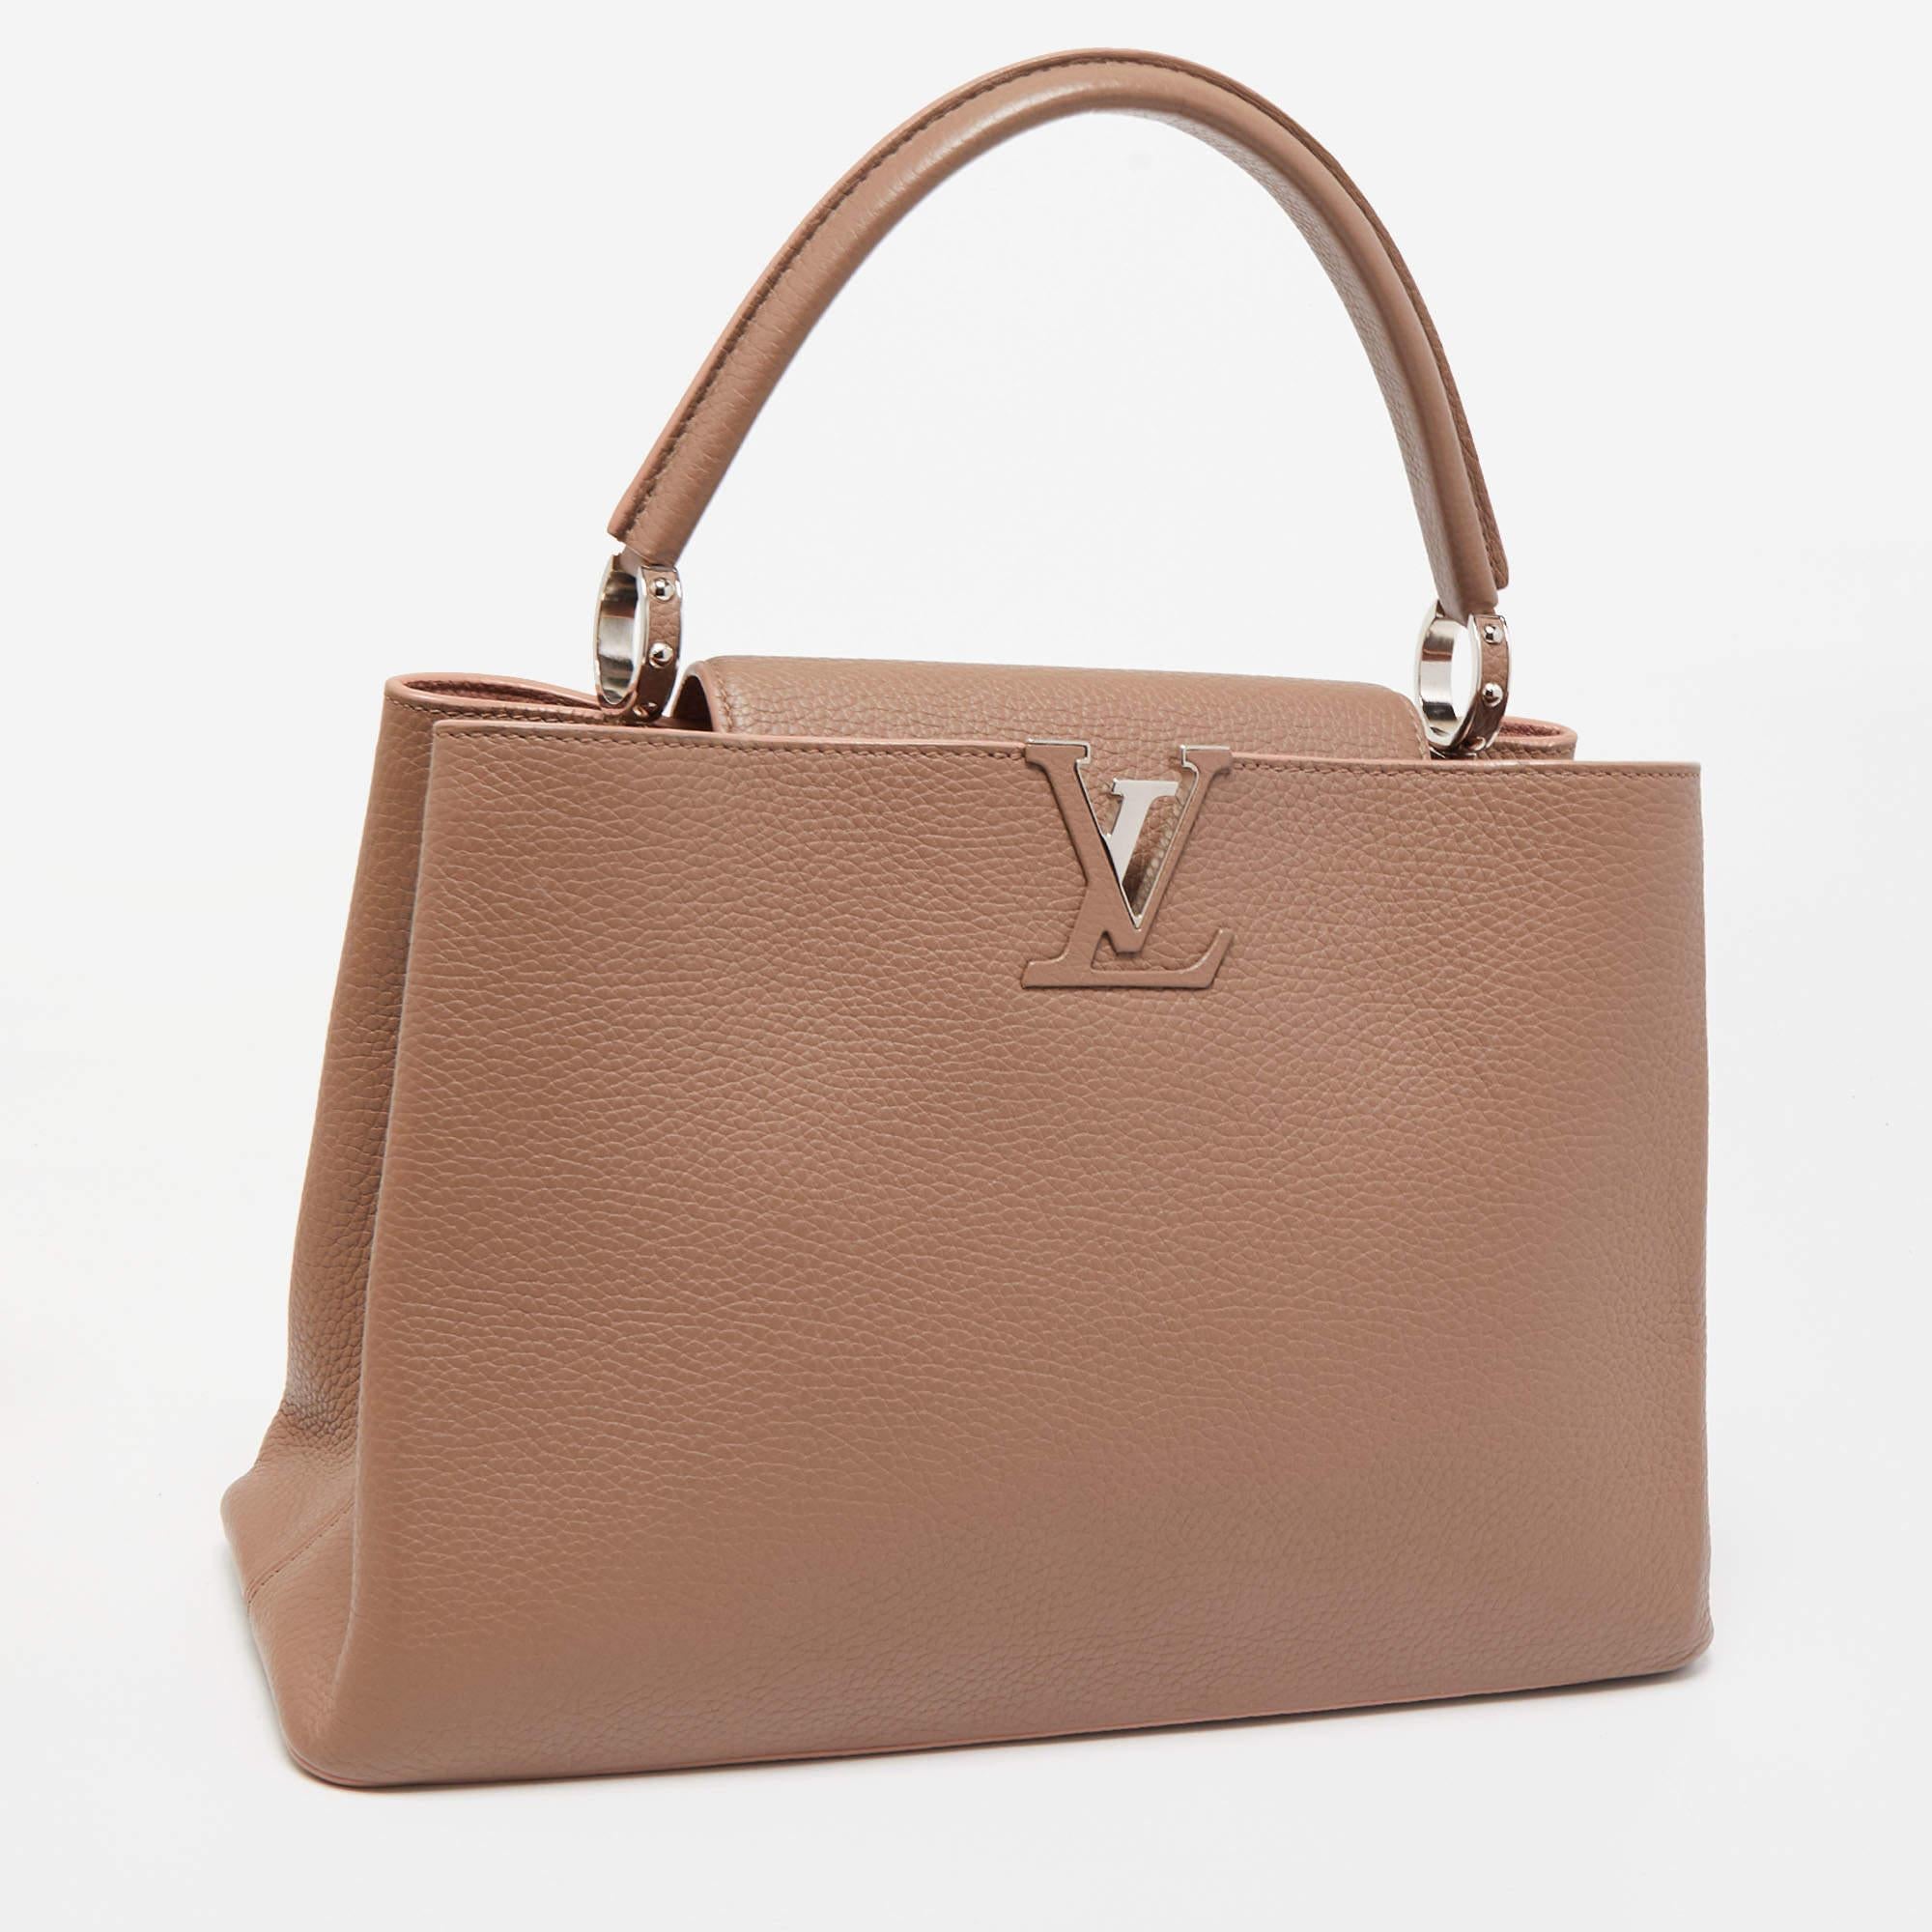 The Louis Vuitton Capucines bag is a luxurious fashion accessory known for its timeless elegance. Crafted from exquisite old rose-hued leather, it features a classic flap design with an LV logo-engraved metallic clasp. The interior is lined with